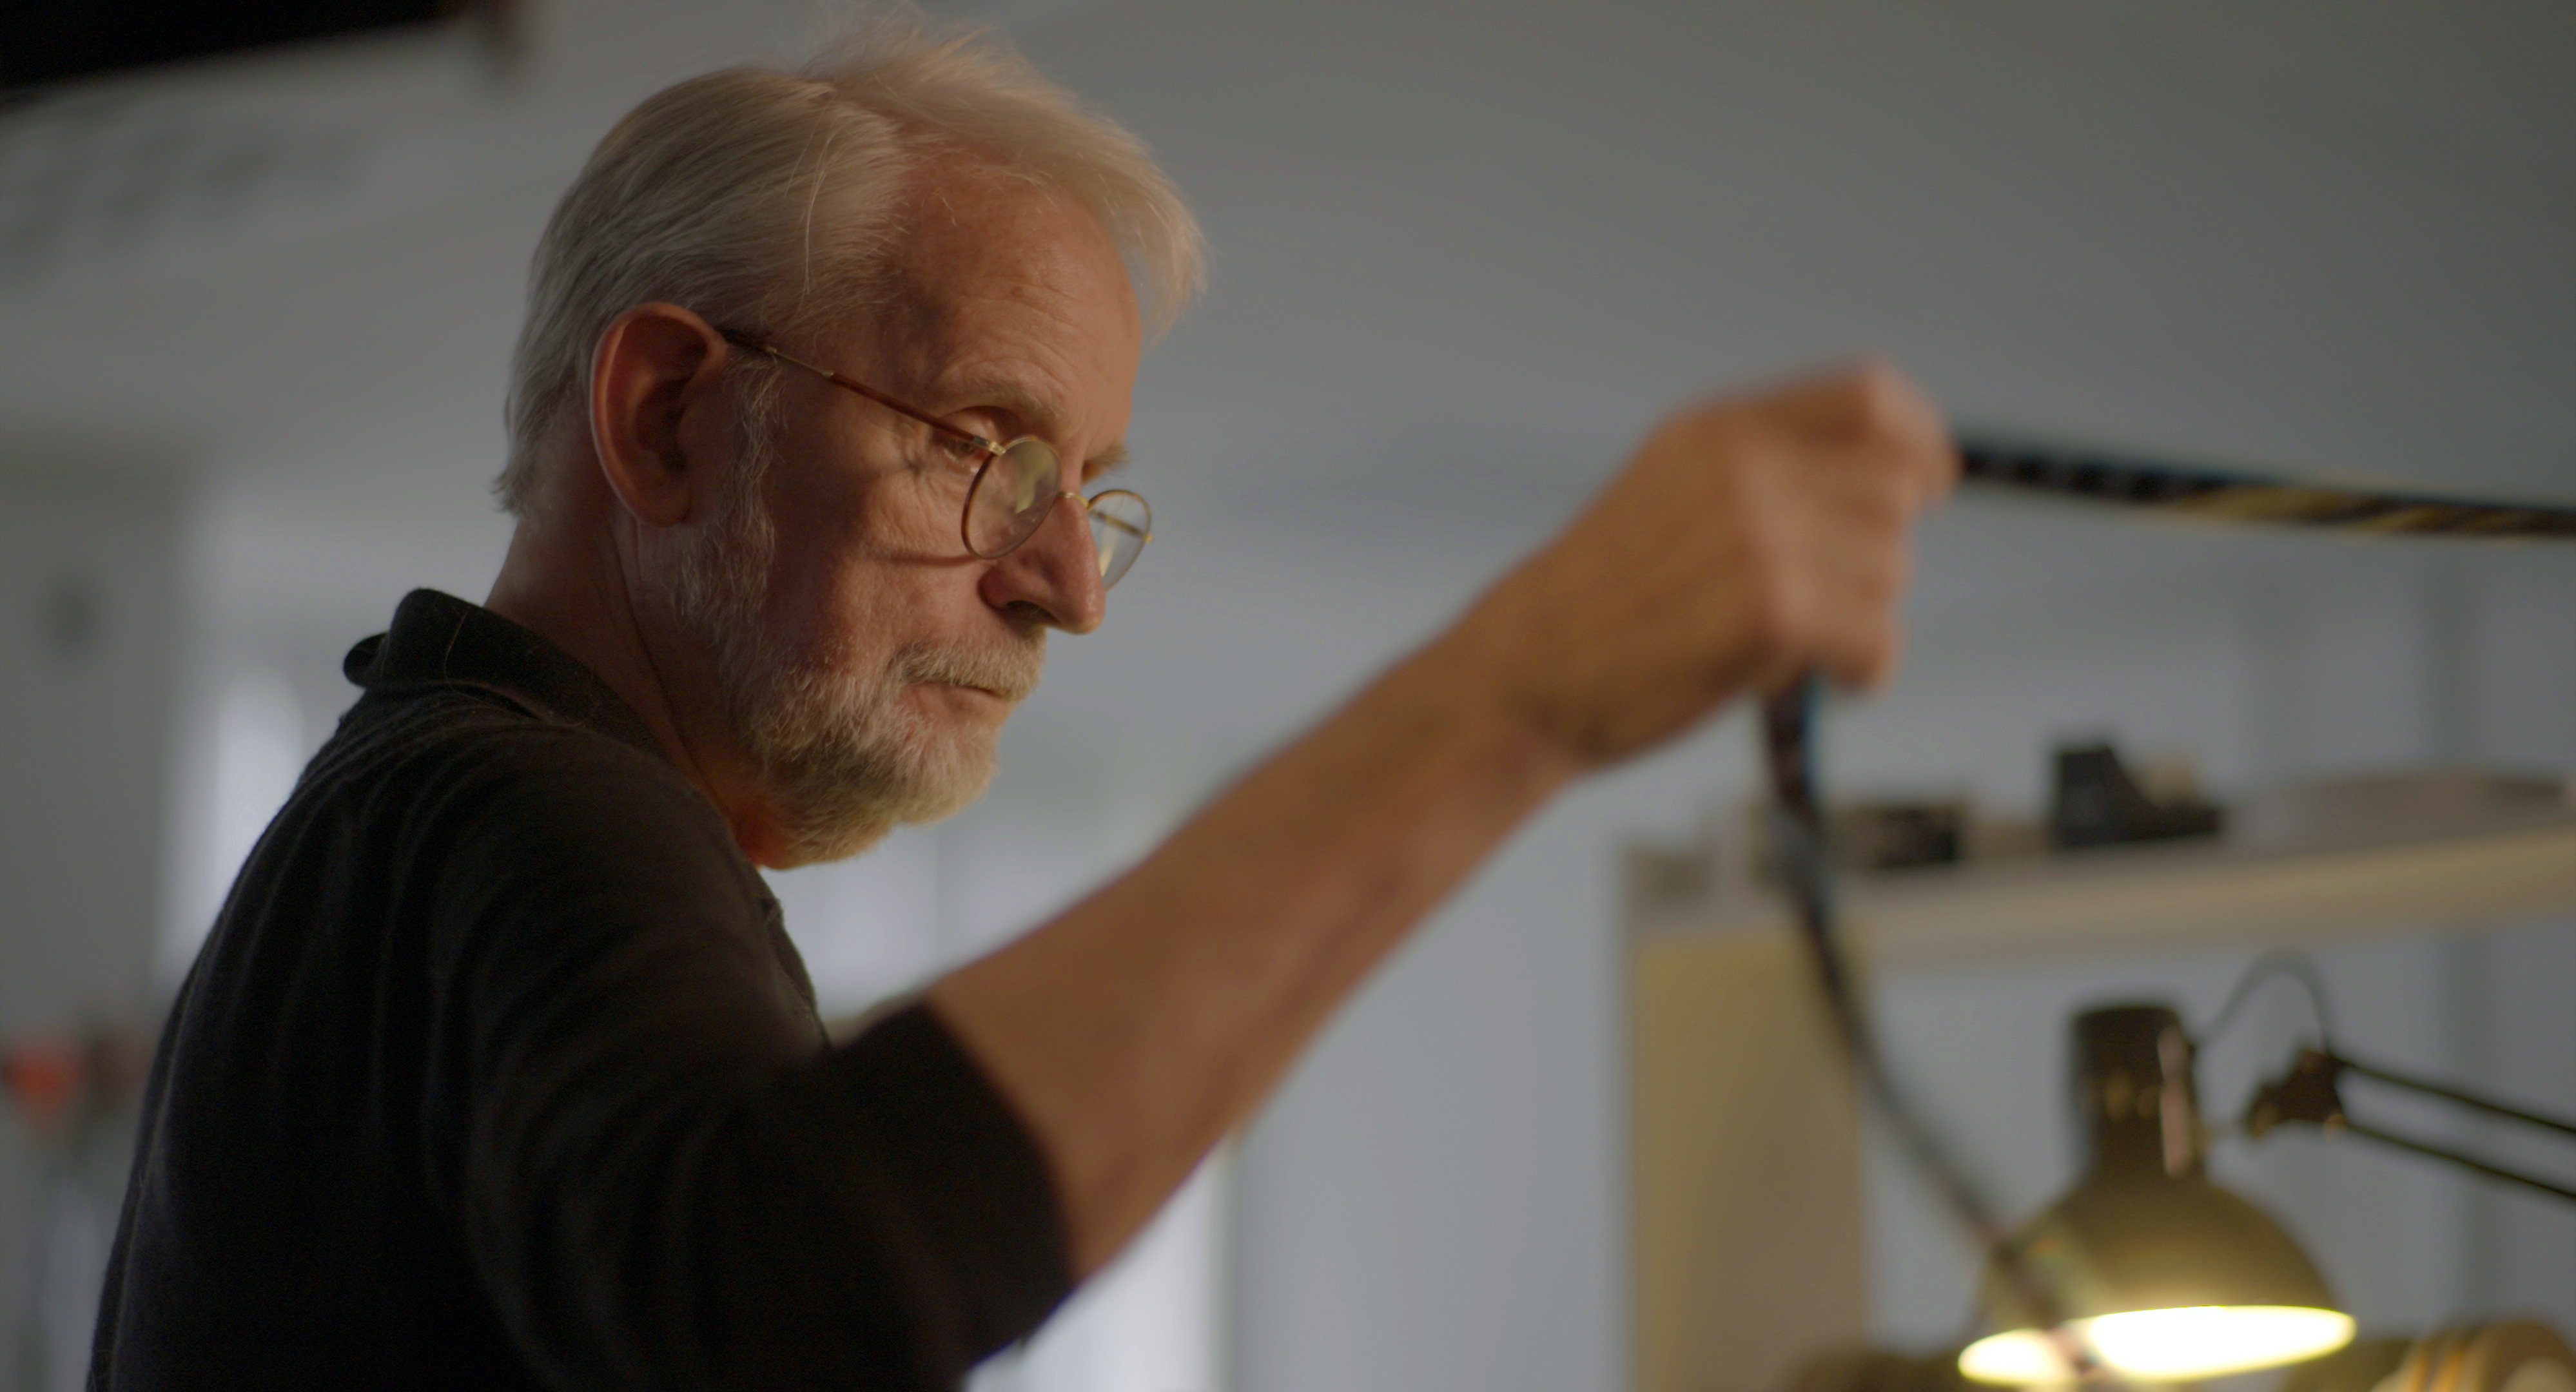 Her Name Was Moviola - An interview with Walter Murch about film editing with the Moviola 2